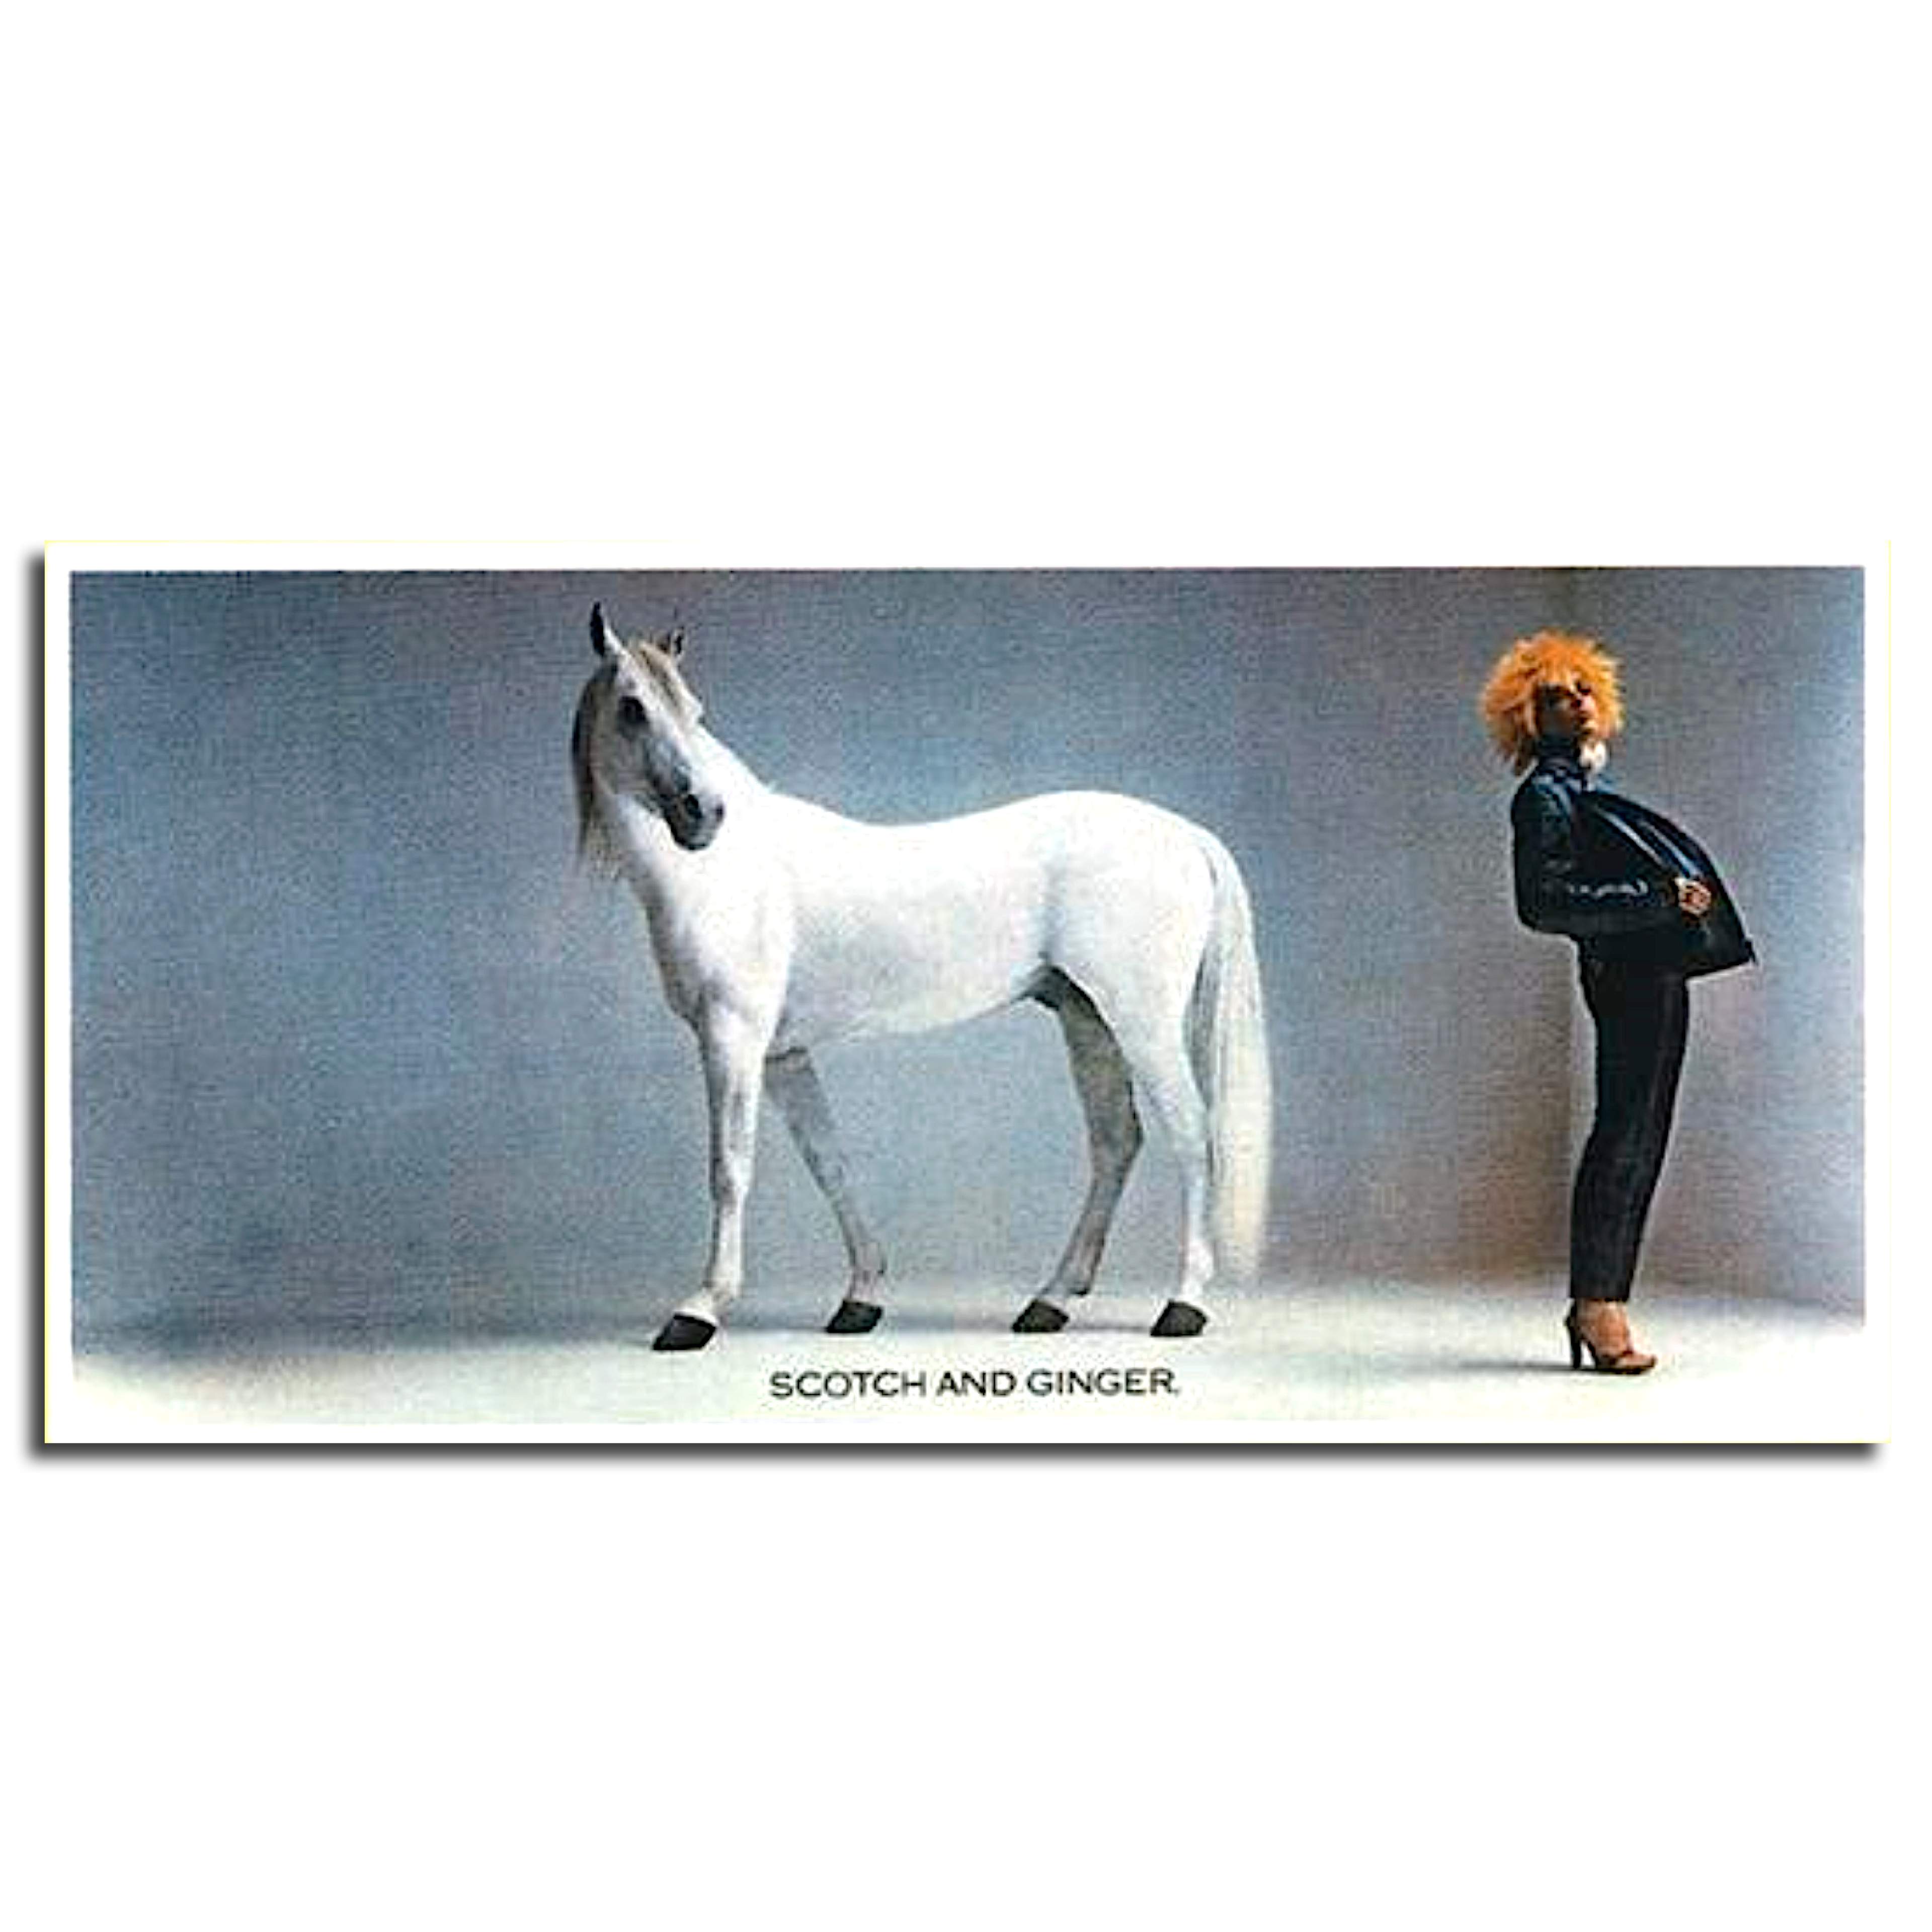 Colour photograph of a white horse and ginger-haired young woman.